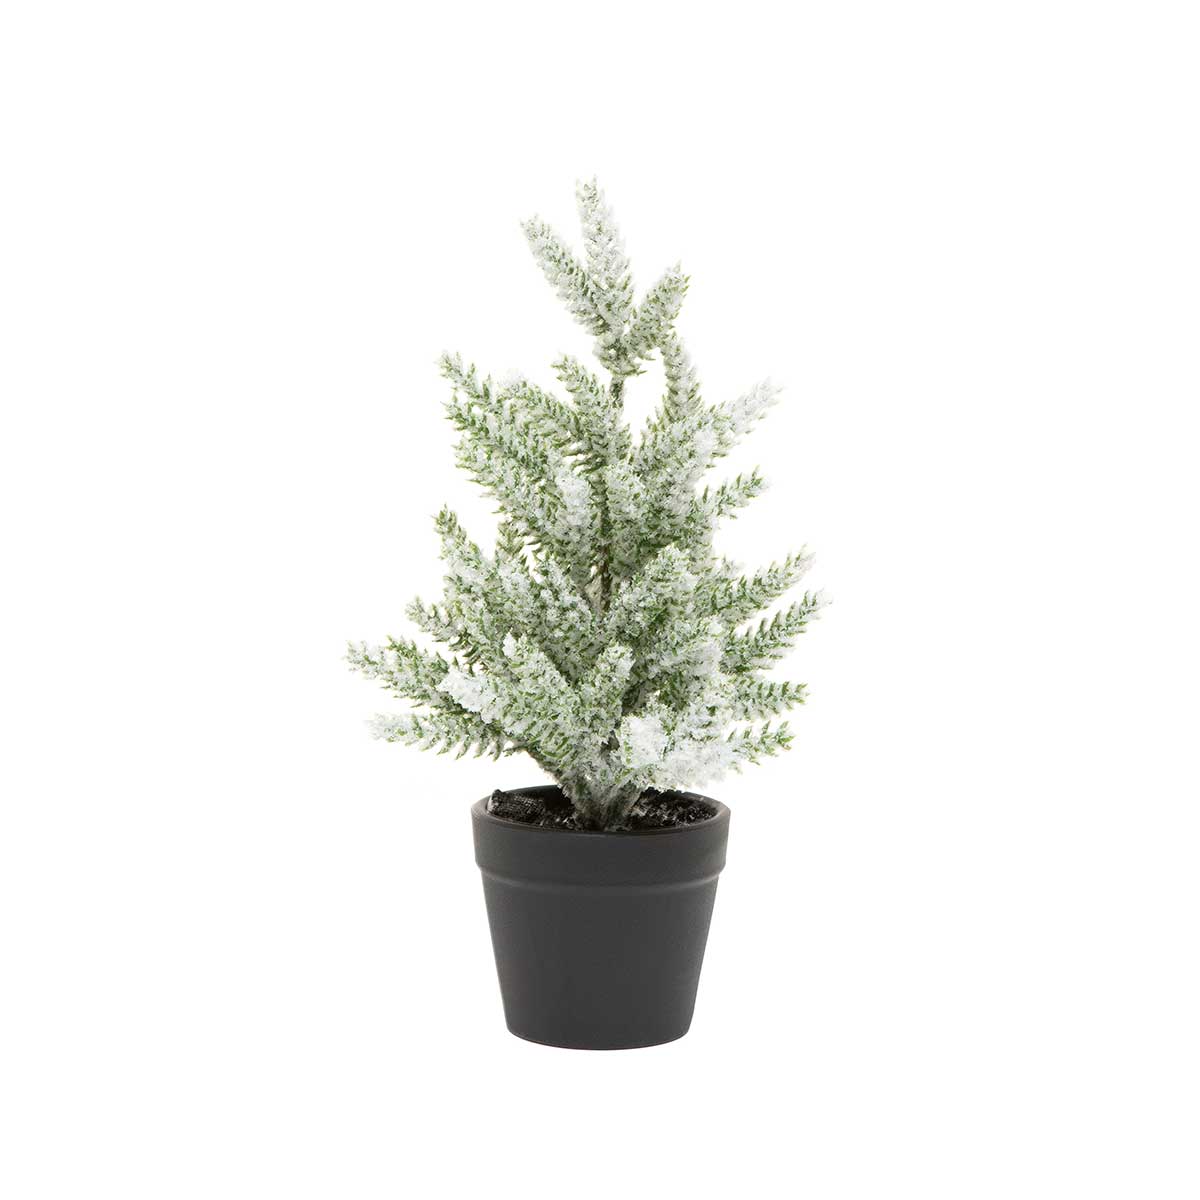 TREE PINE WITH SNOW SMALL 5IN X 9IN IN BLACK POT PLASTIC